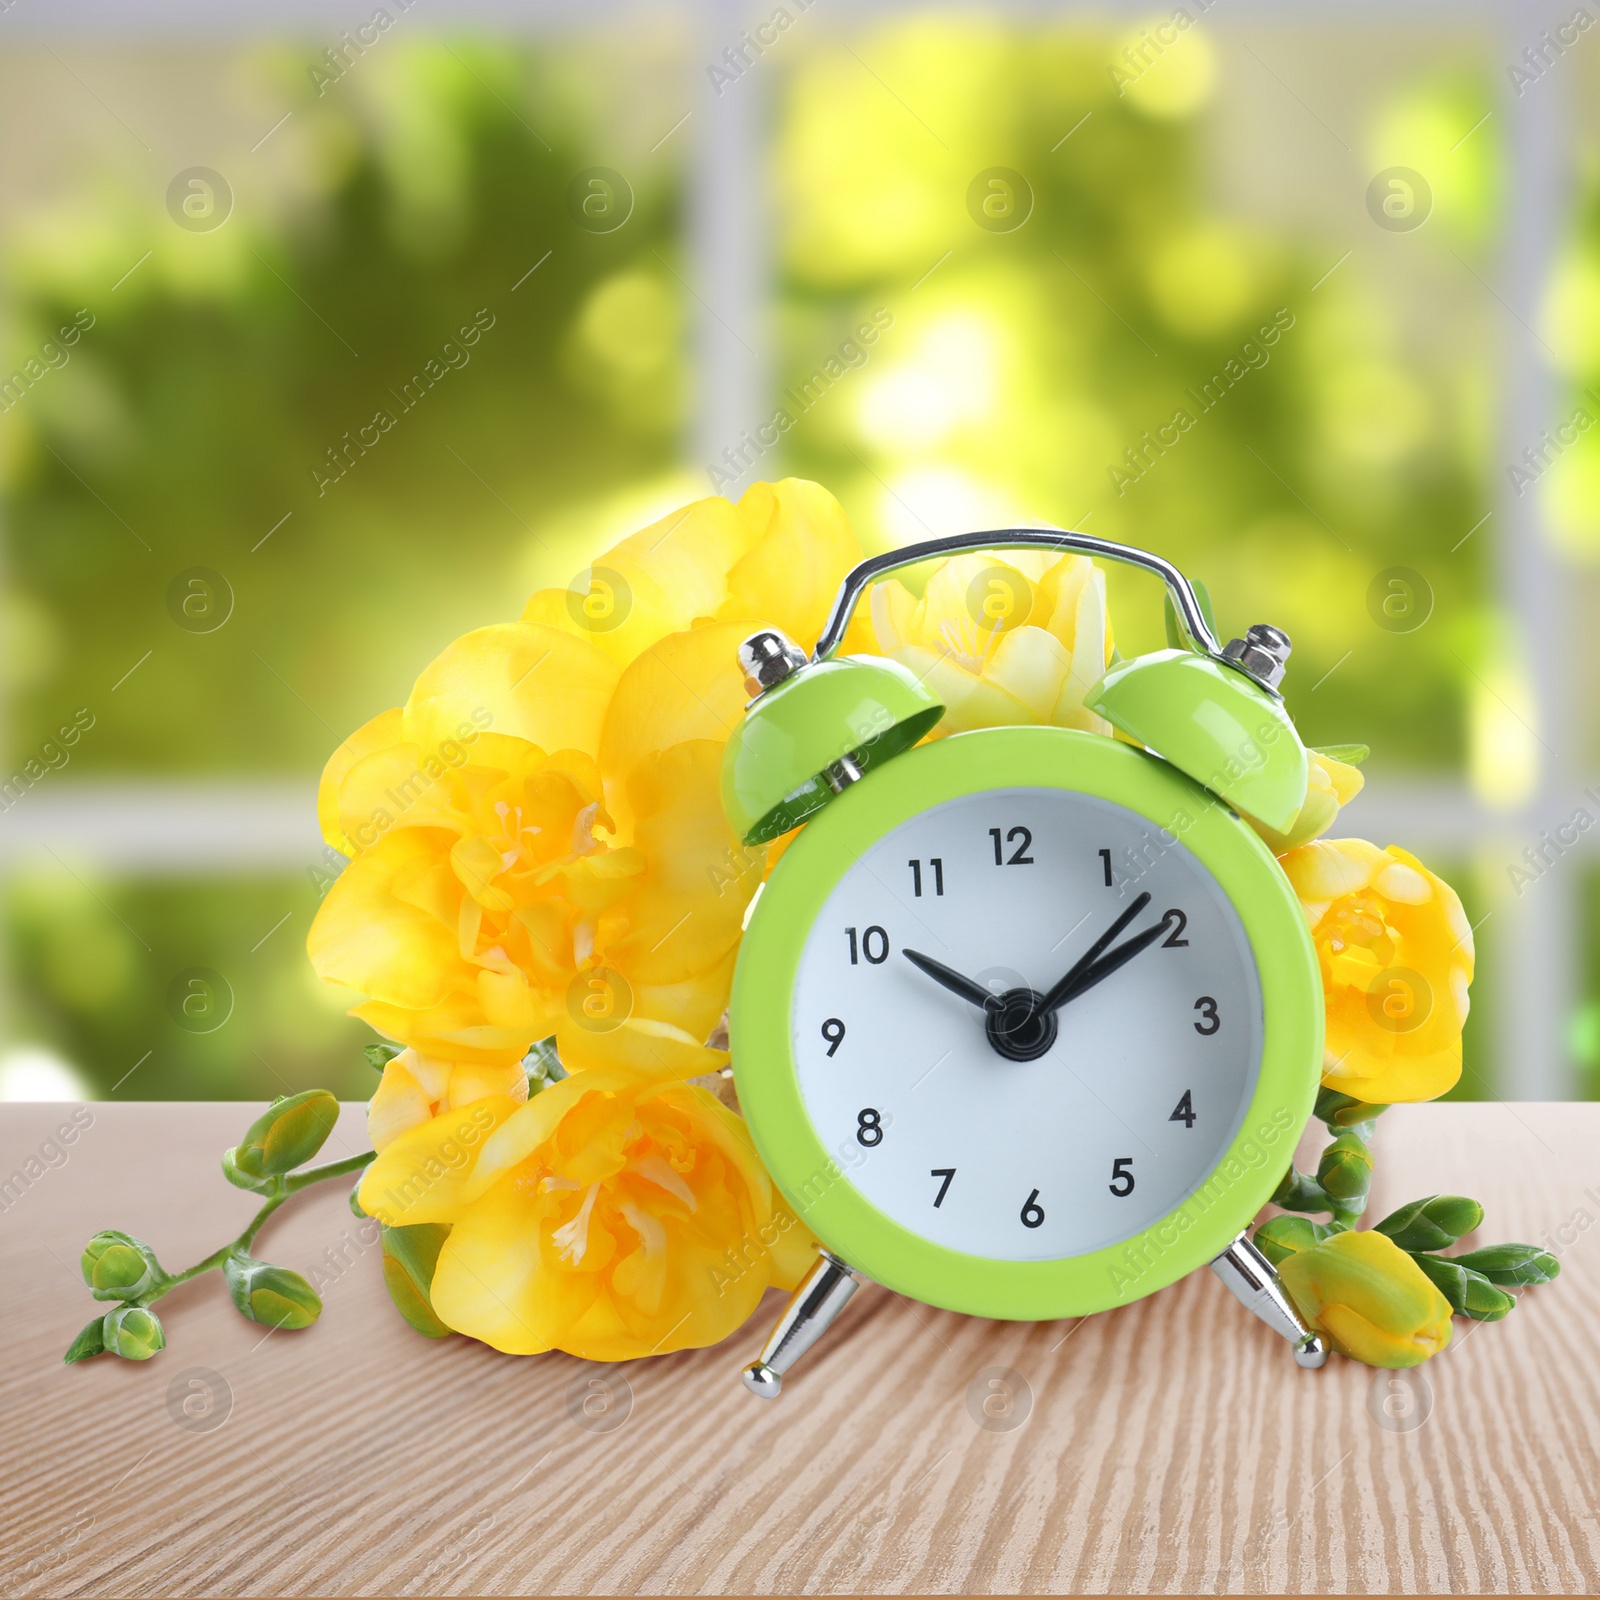 Image of Alarm clock and flowers on table against blurred background. Spring time